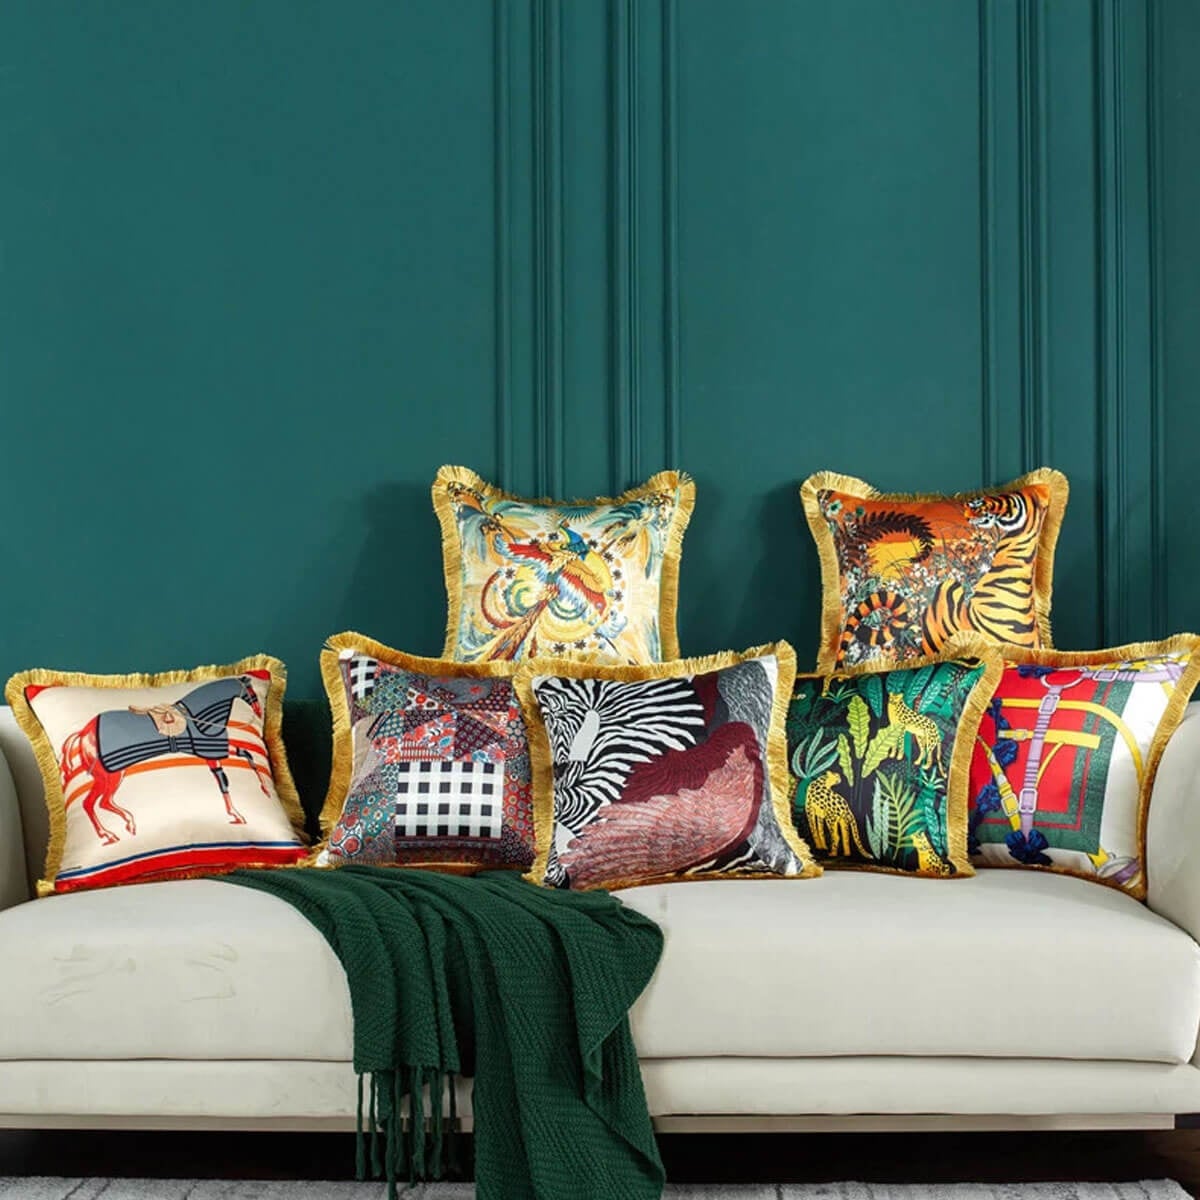 https://cdn.shopify.com/s/files/1/0557/9459/8038/products/luxury-silk-pillowcase-tropical-forest-decorative-pillows-cushion-cover-400.jpg?v=1698533289&width=1200